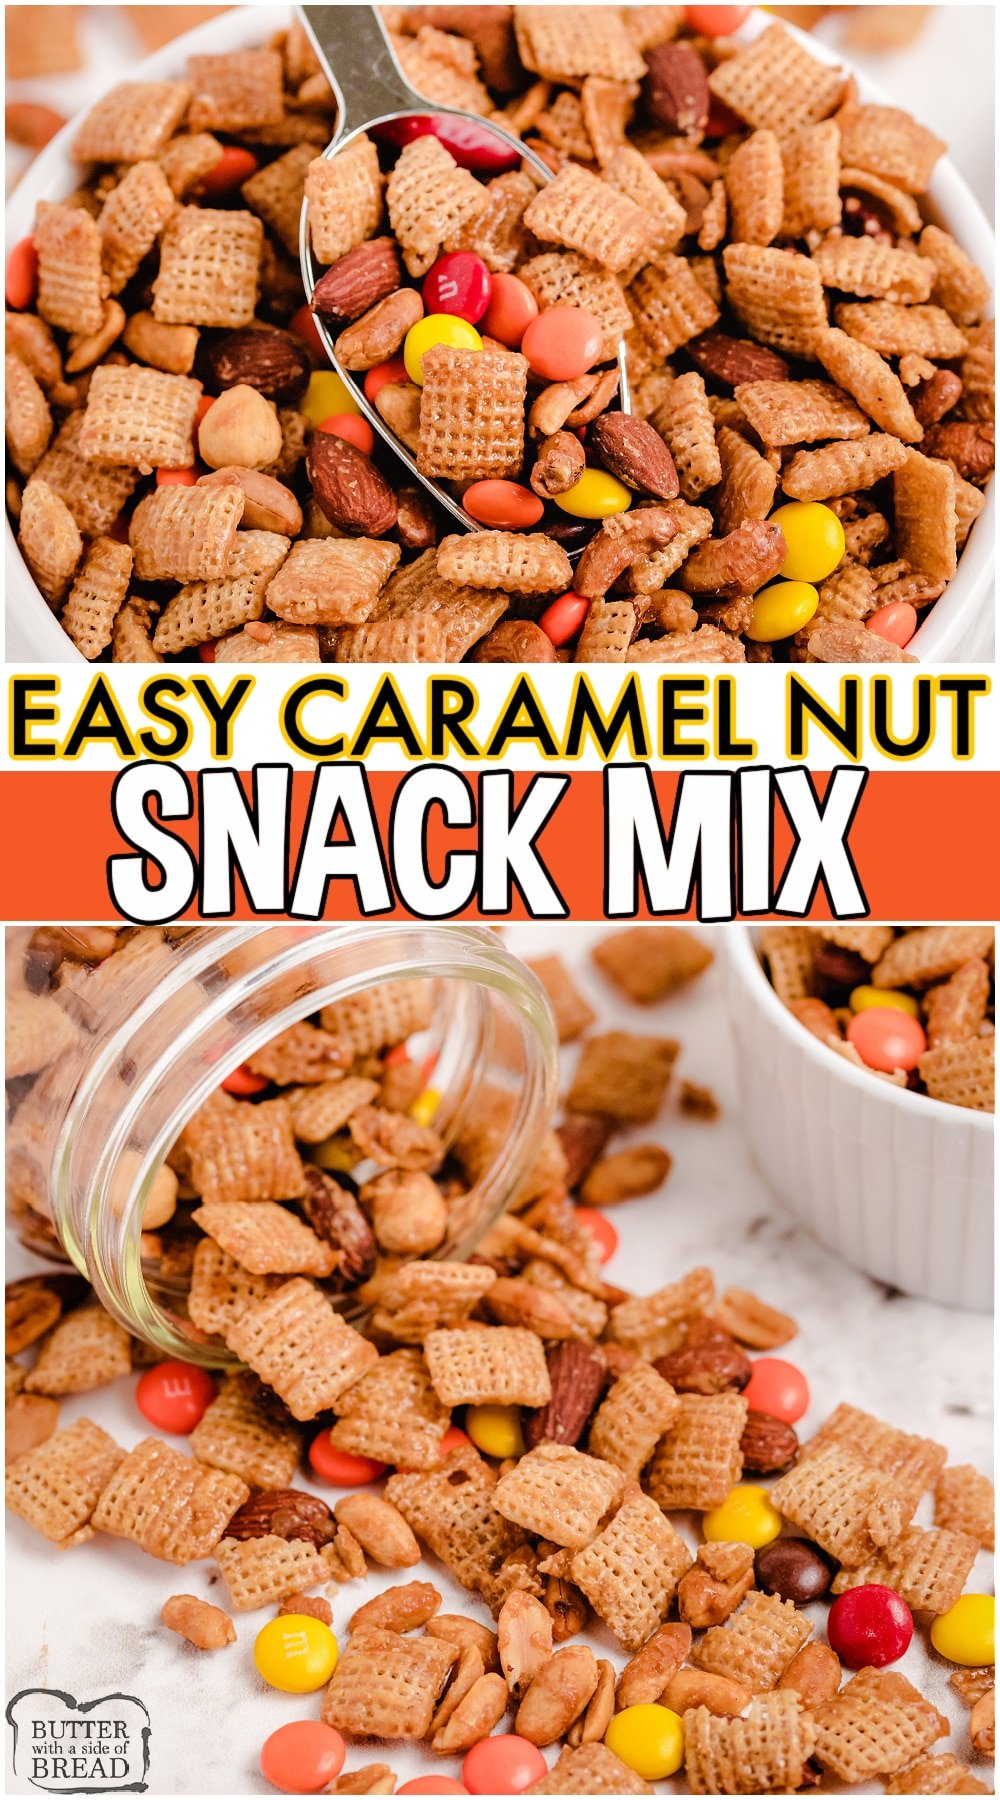 Caramel Nut Snack Mix is a crunchy caramel combination of Chex cereal, nuts and M&M’s that’s so delicious your whole family will love it! Perfect snack mix for watching football, sharing with friends or gifting! #chex #snackmix #saltysweet #easyrecipe from BUTTER WITH A SIDE OF BREAD